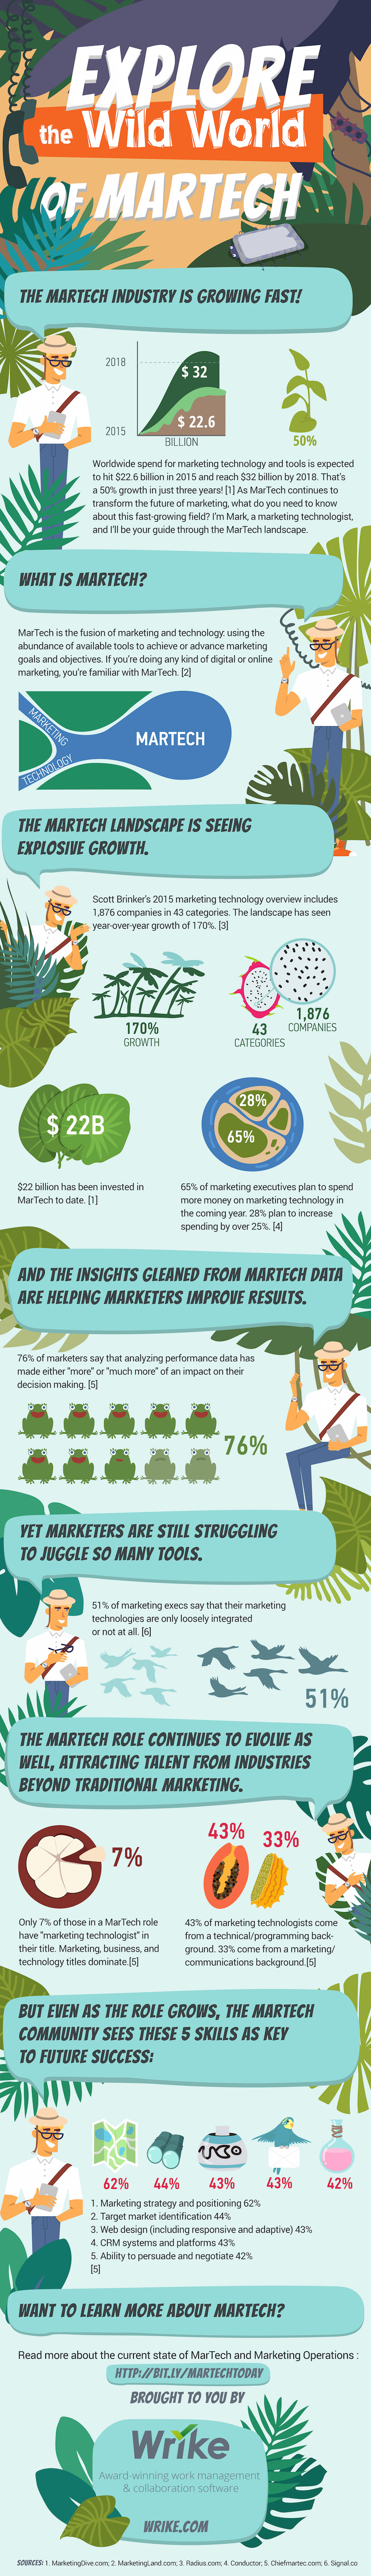 The Guide to MarTech in 2015 (Infographic)